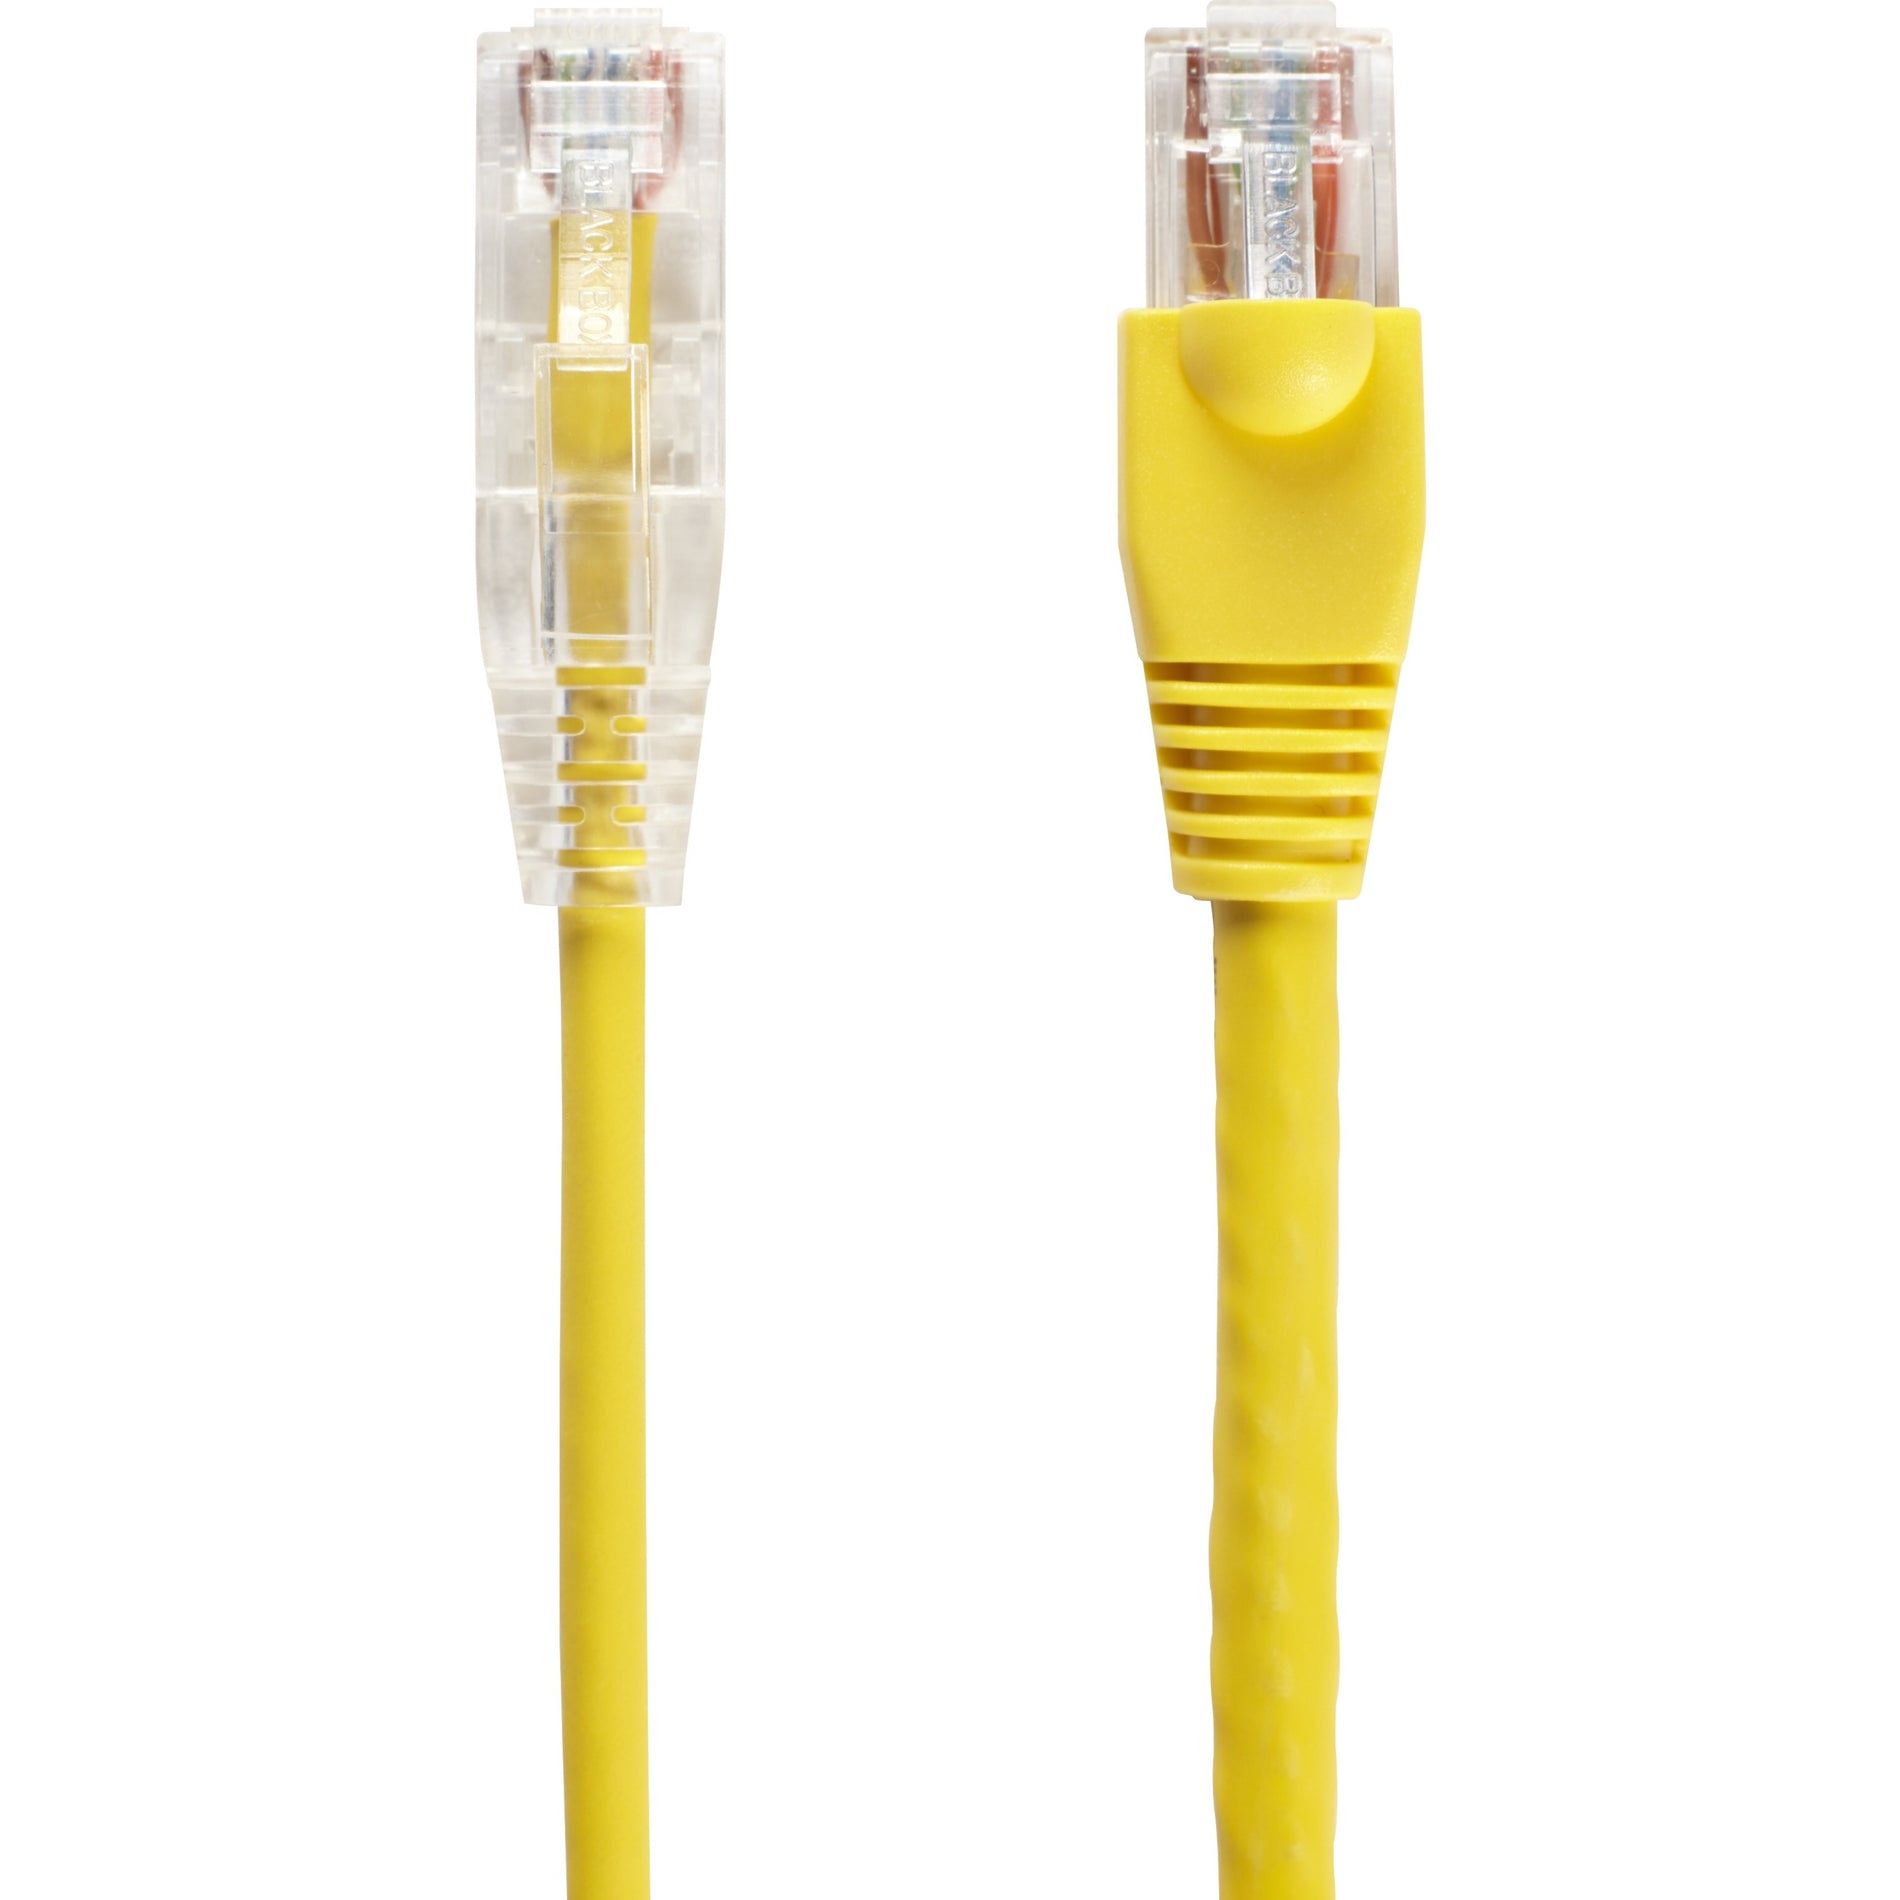 Black Box C6APC28-YL-20 Slim-Net Cat.6a UTP Patch Network Cable, 20 ft, Snagless Boot, 10 Gbit/s Data Transfer Rate, Yellow